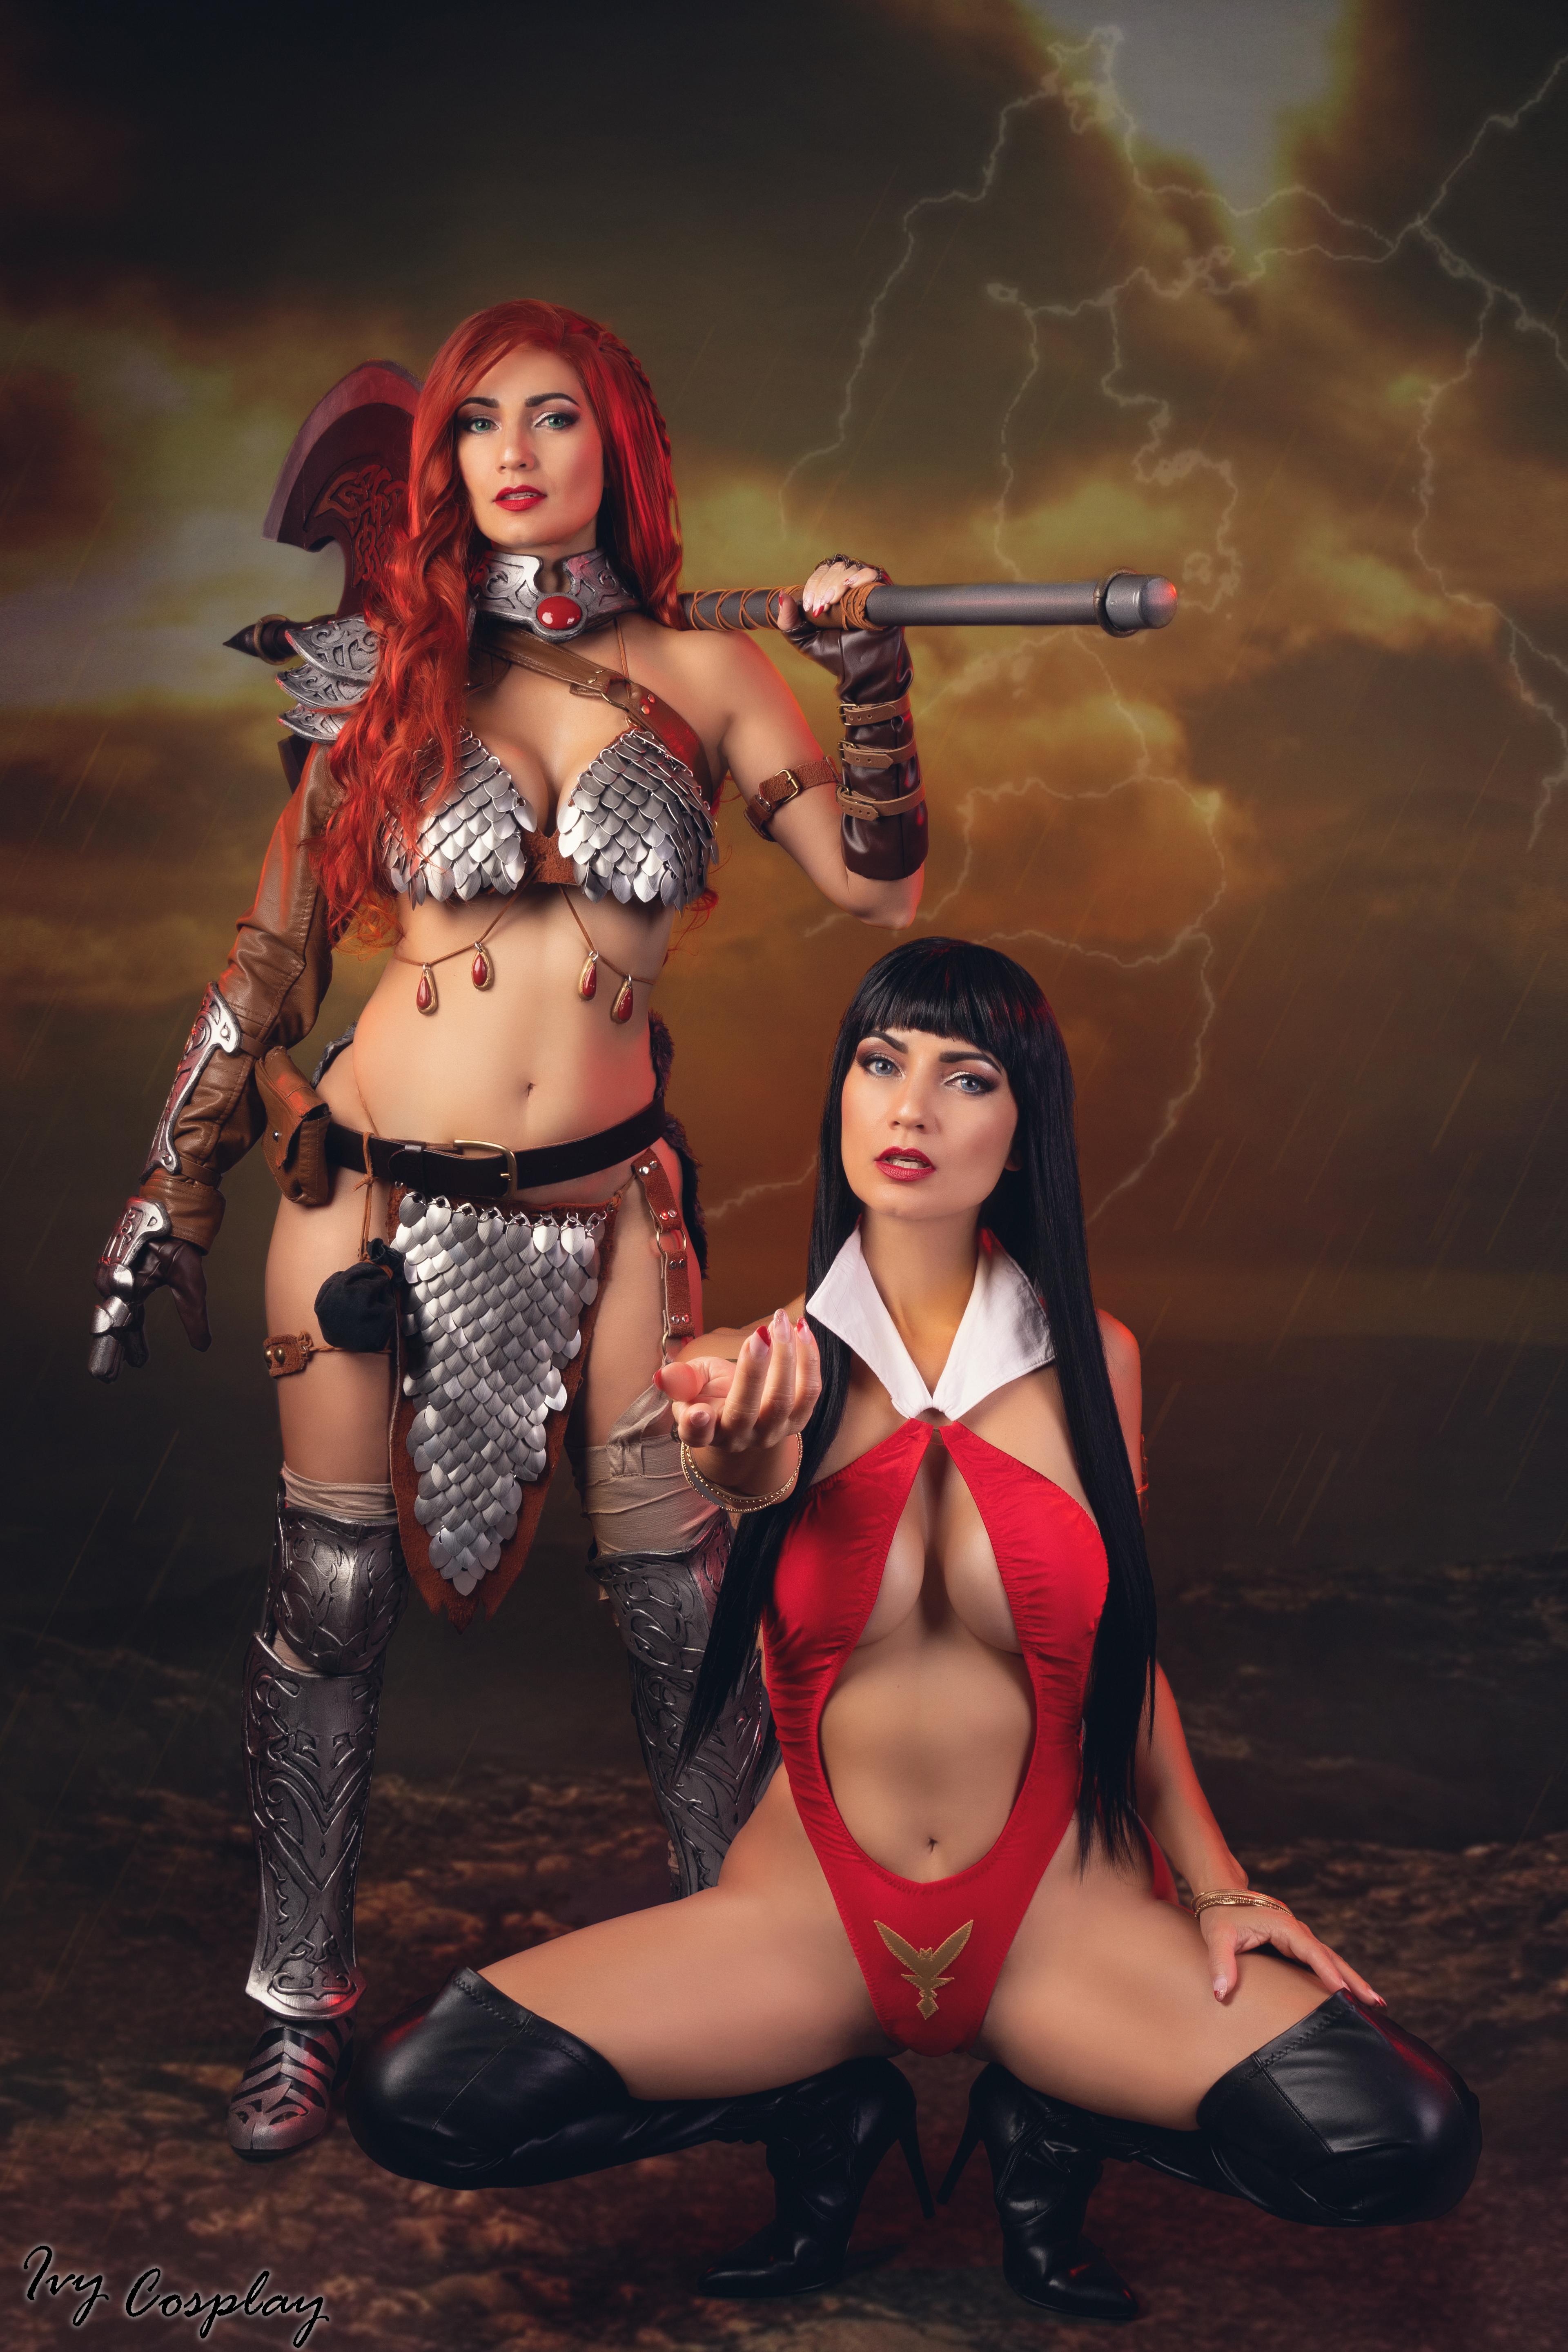 Red Sonja and Vampirella from the Dynamite comic books cosplayer is me both of them.